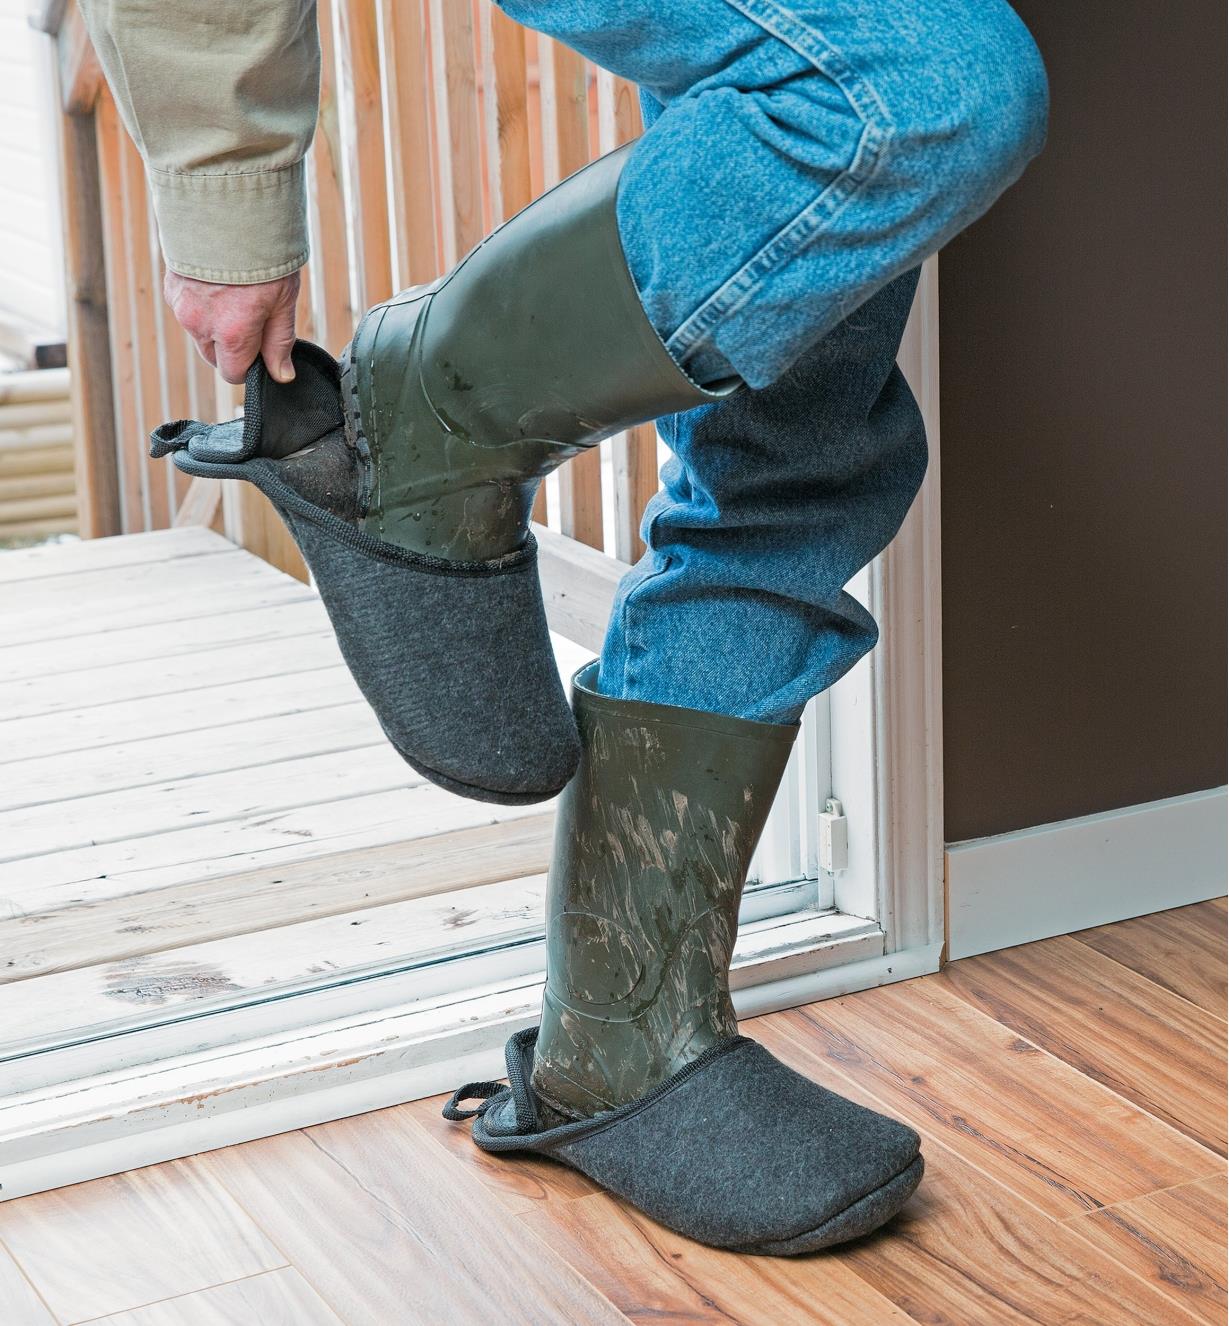 Man putting on second boot slipper over muddy boot before coming inside